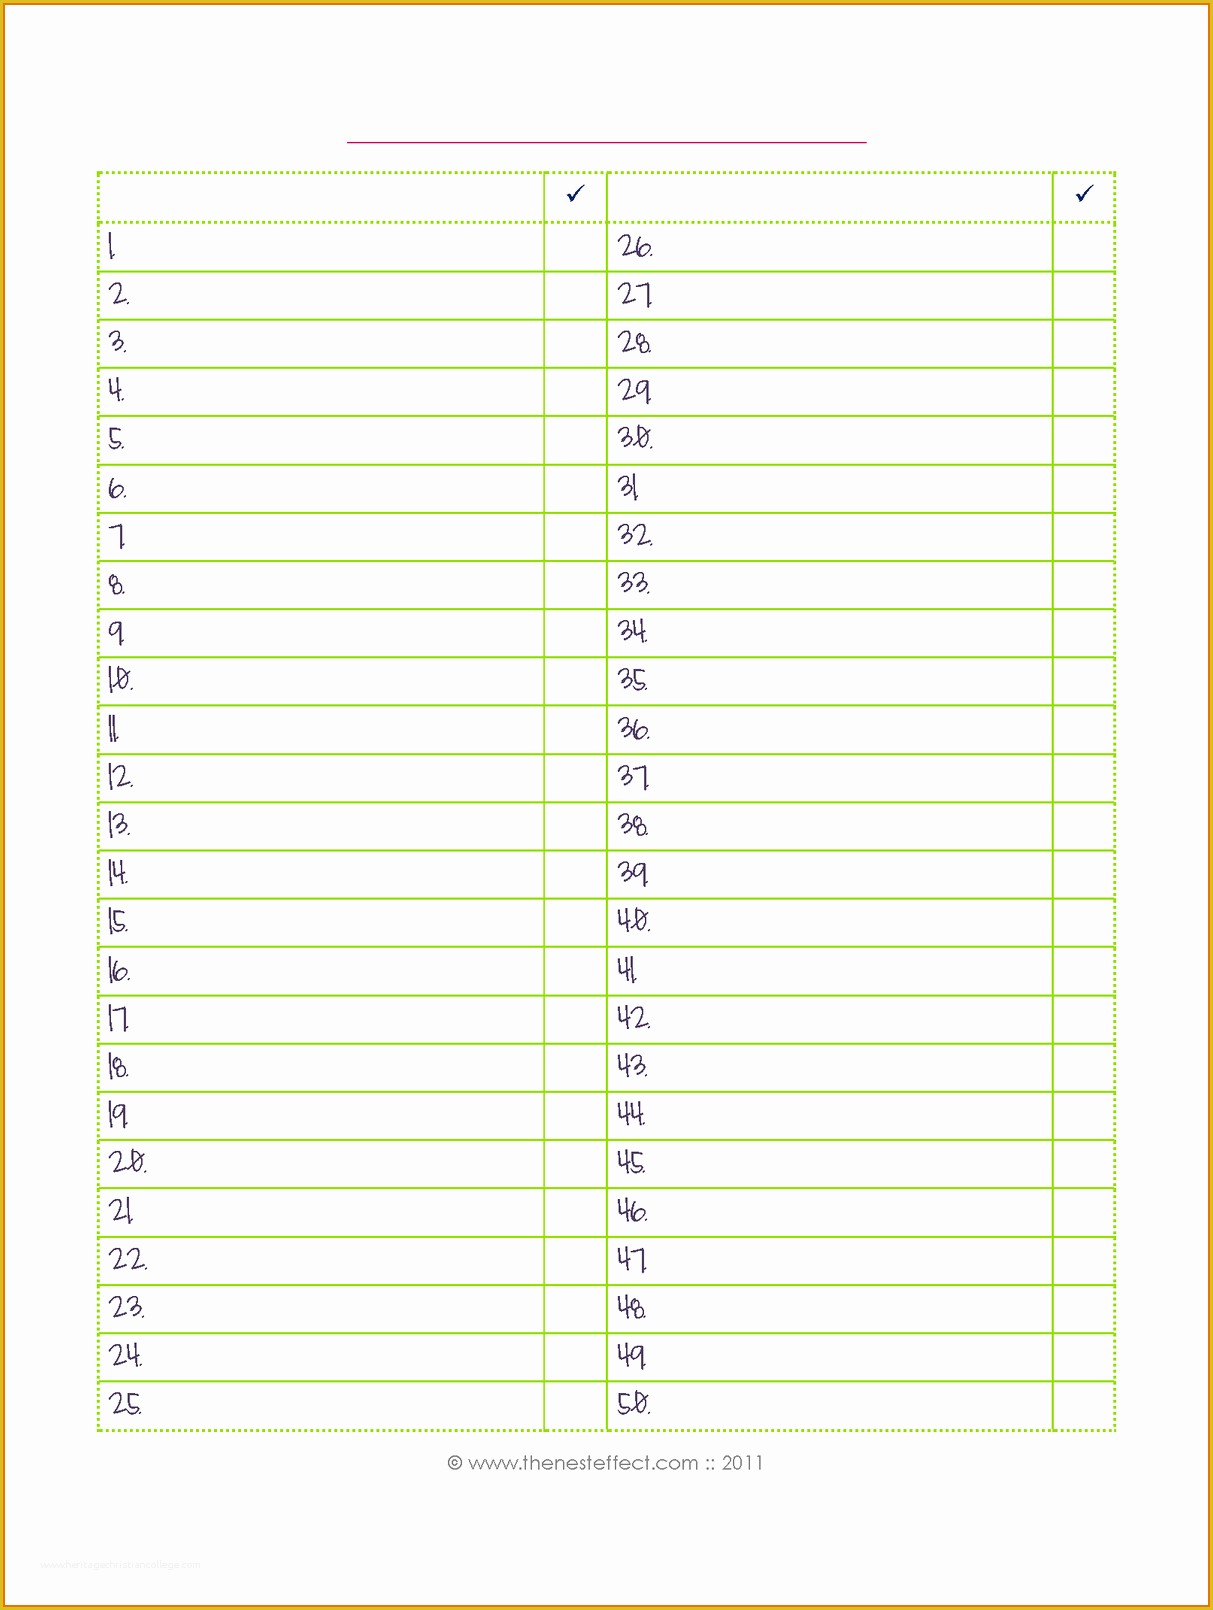 Free Downloadable Checklist Templates Of 8 Blank Checklist Templatereference Letters Words